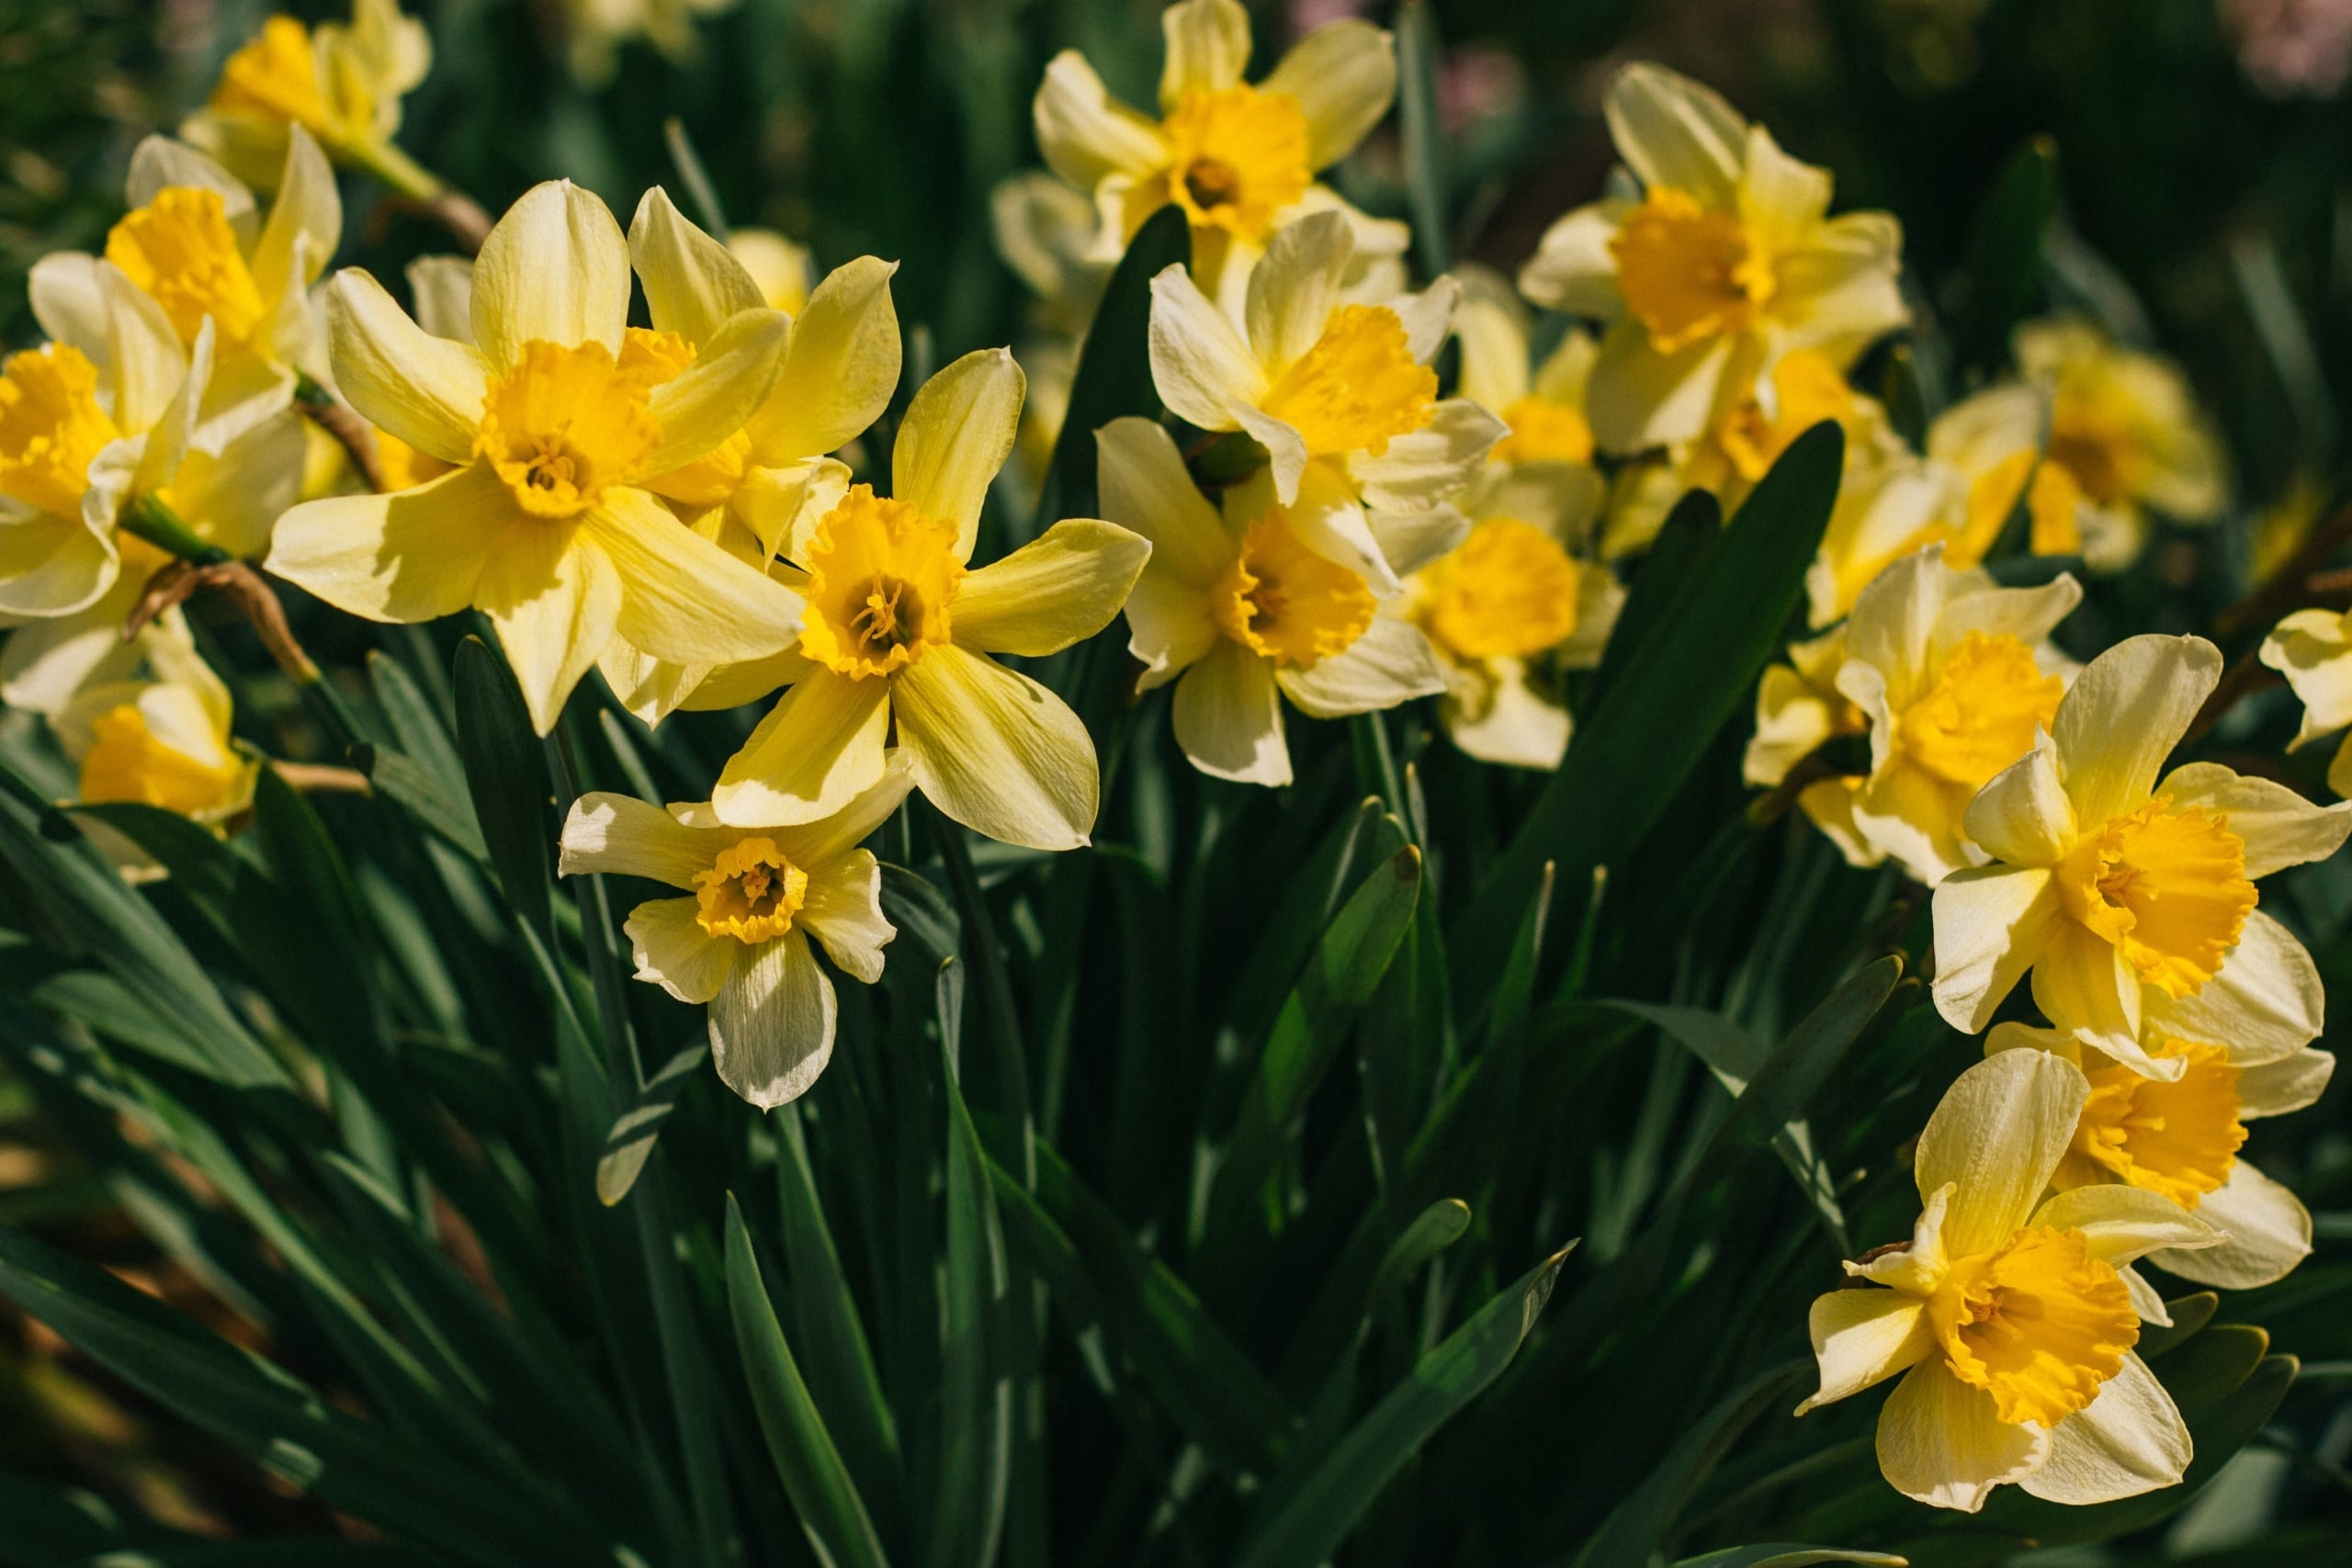 An image of daffodils growing in the sun